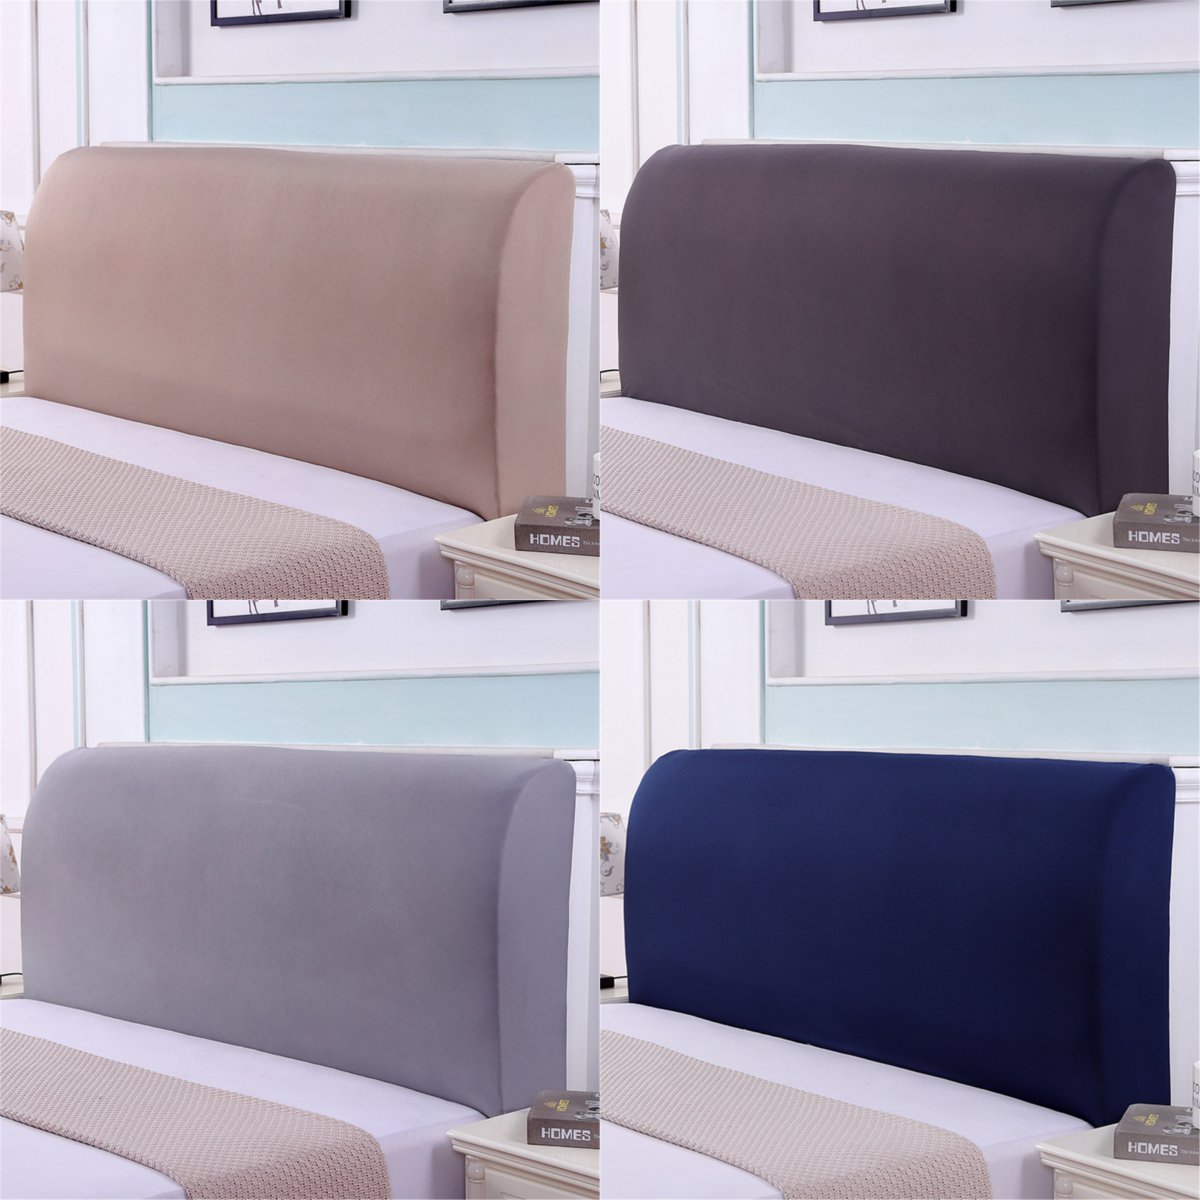 200CM-Polyester-Elastic-Bed-Headboard-Cover-Full-Dustproof-Protector-Slipcover-Bed-Protection-Dust-C-1698681-2